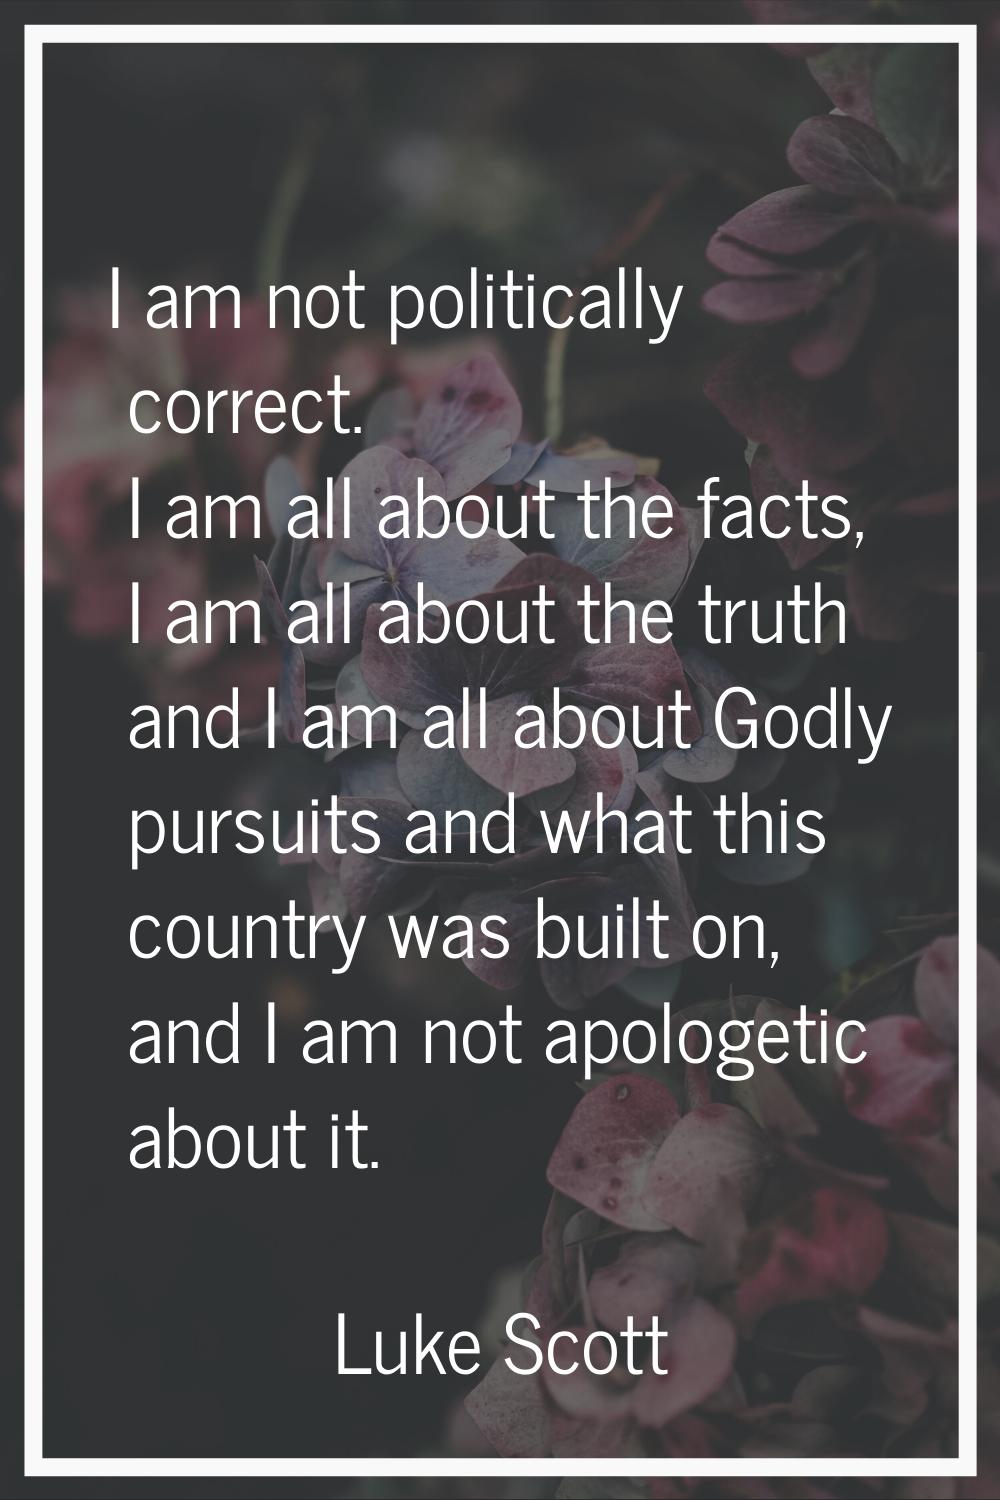 I am not politically correct. I am all about the facts, I am all about the truth and I am all about